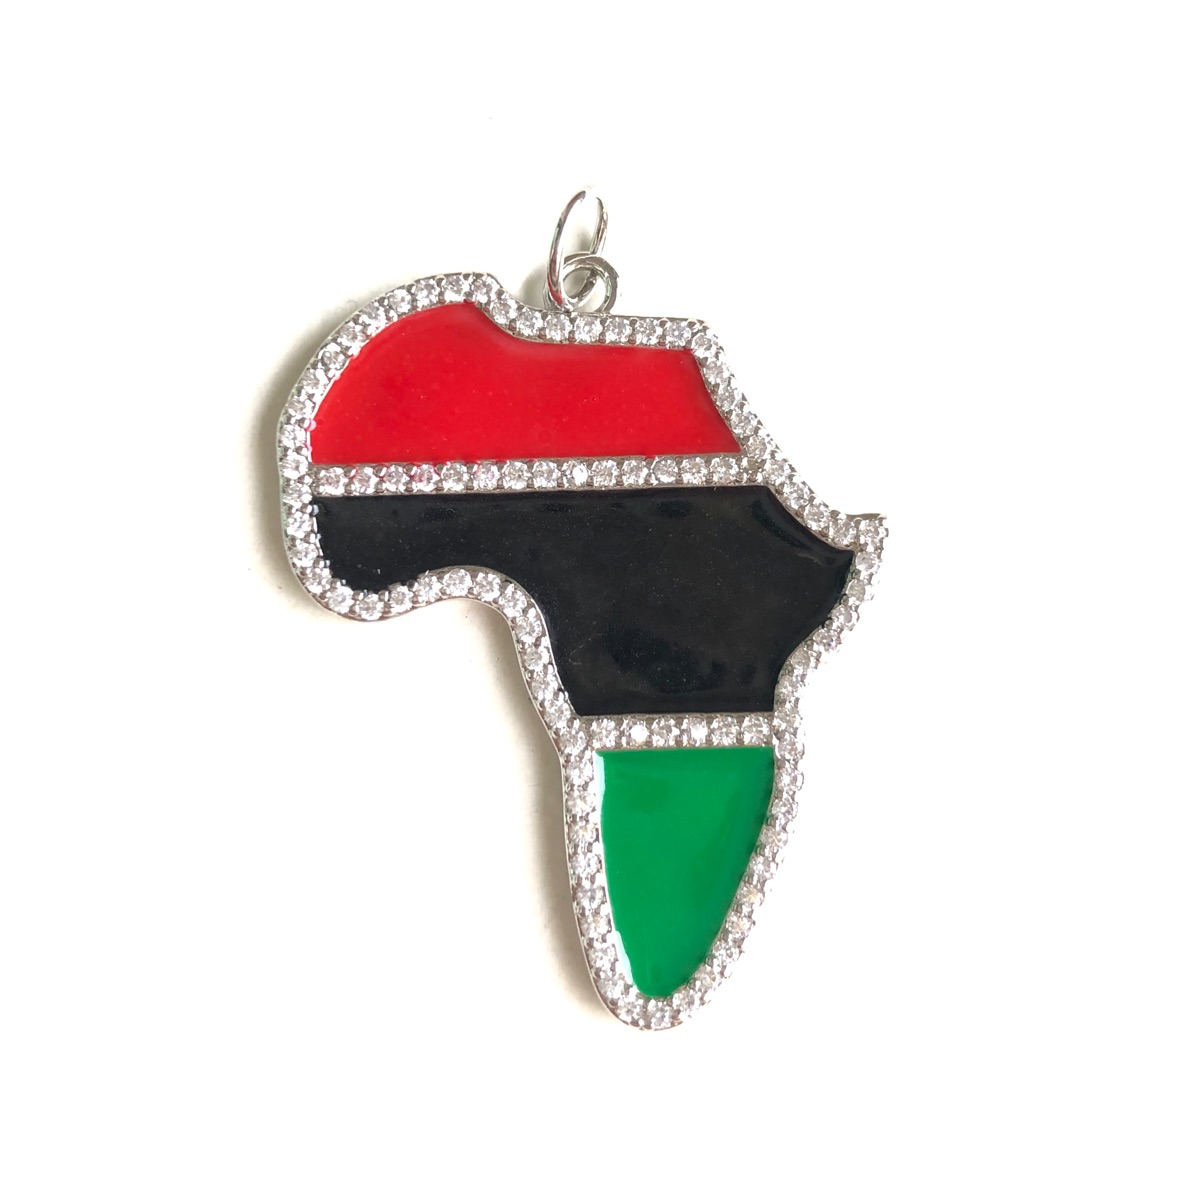 10pcs/lot Red Black Green Enamel Africa Map CZ Pave Charms for Black History Month Juneteenth Awareness Silver CZ Paved Charms Juneteenth & Black History Month Awareness New Charms Arrivals Charms Beads Beyond